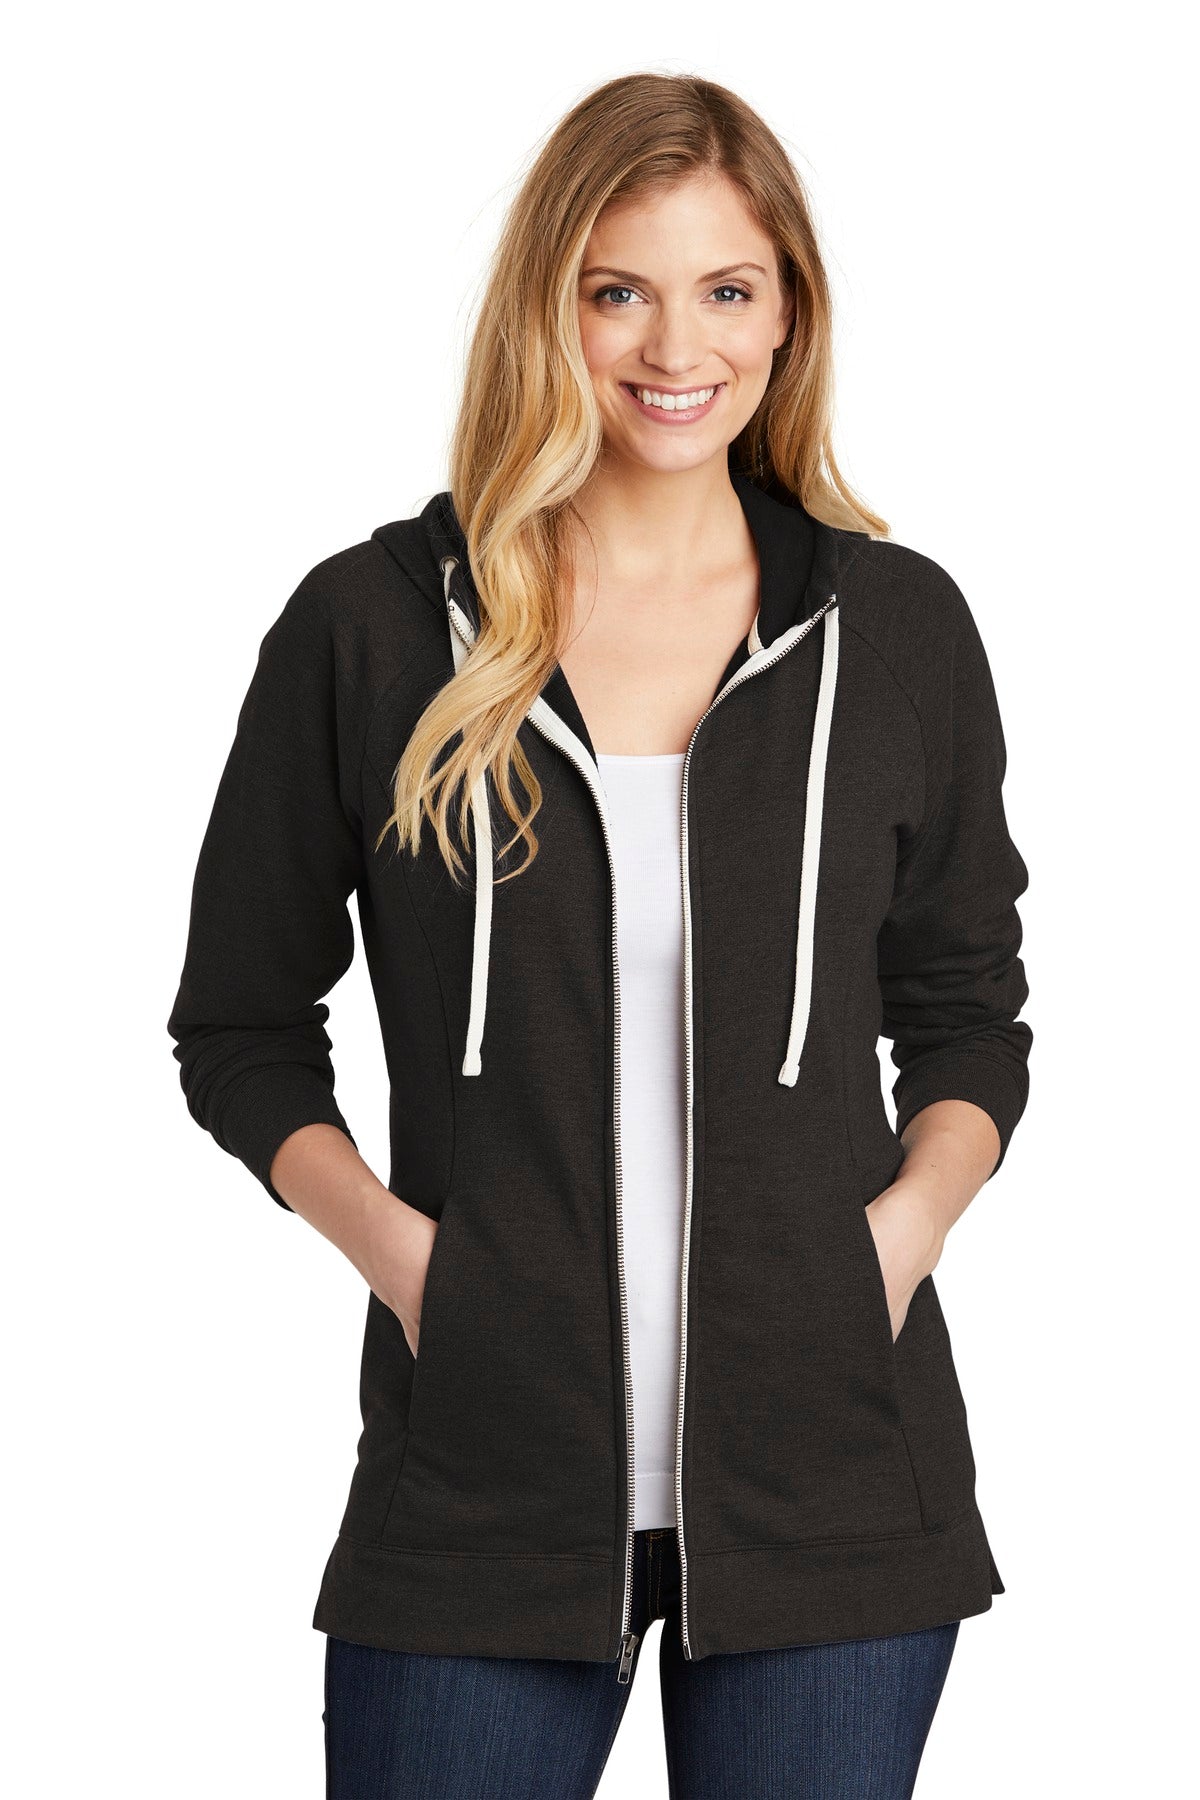 District ® Women's Perfect Tri ® French Terry Full-Zip Hoodie. DT456 - DFW Impression